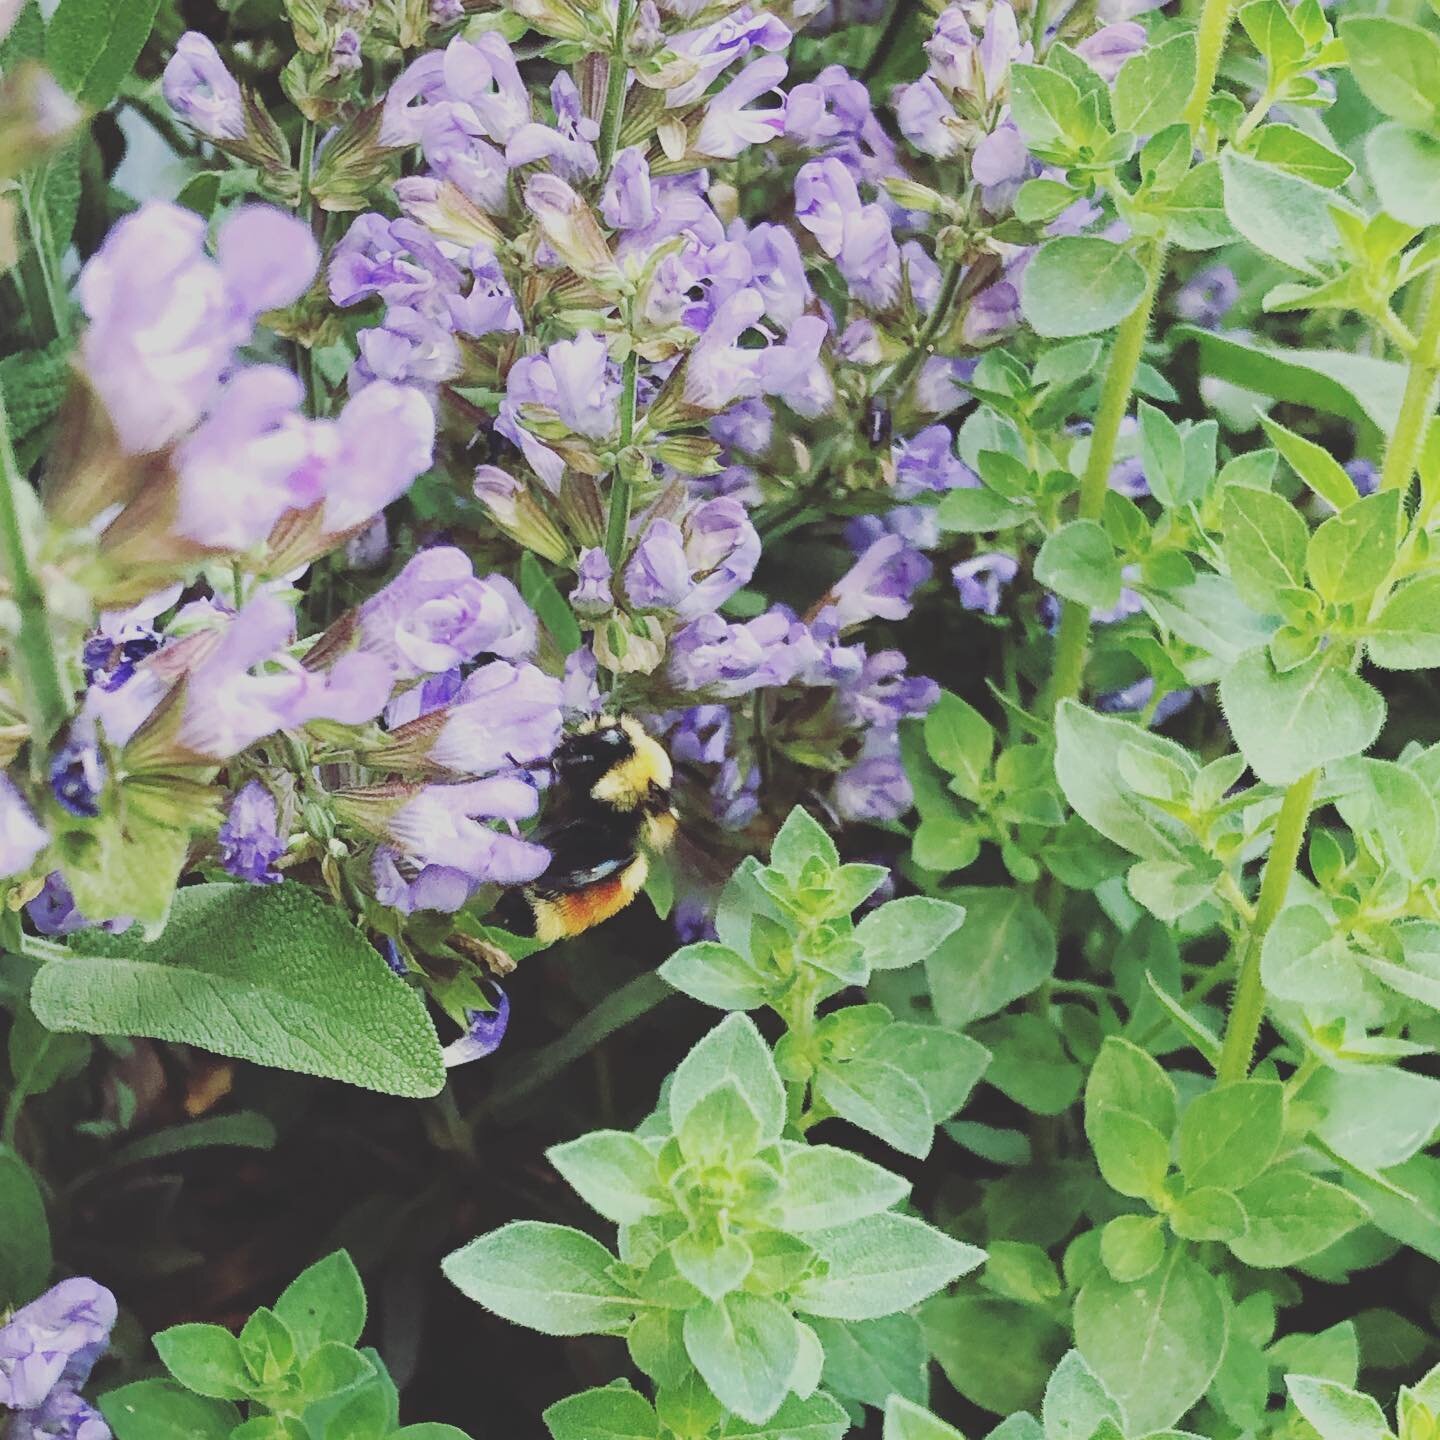 We&rsquo;ve been busy bees around here planning next steps, groups and fundraising efforts. Just keep telling myself to stop and breath it all in. Sometimes I like to take a moment in my herb garden to inhale the beautiful scents nature provides. #be